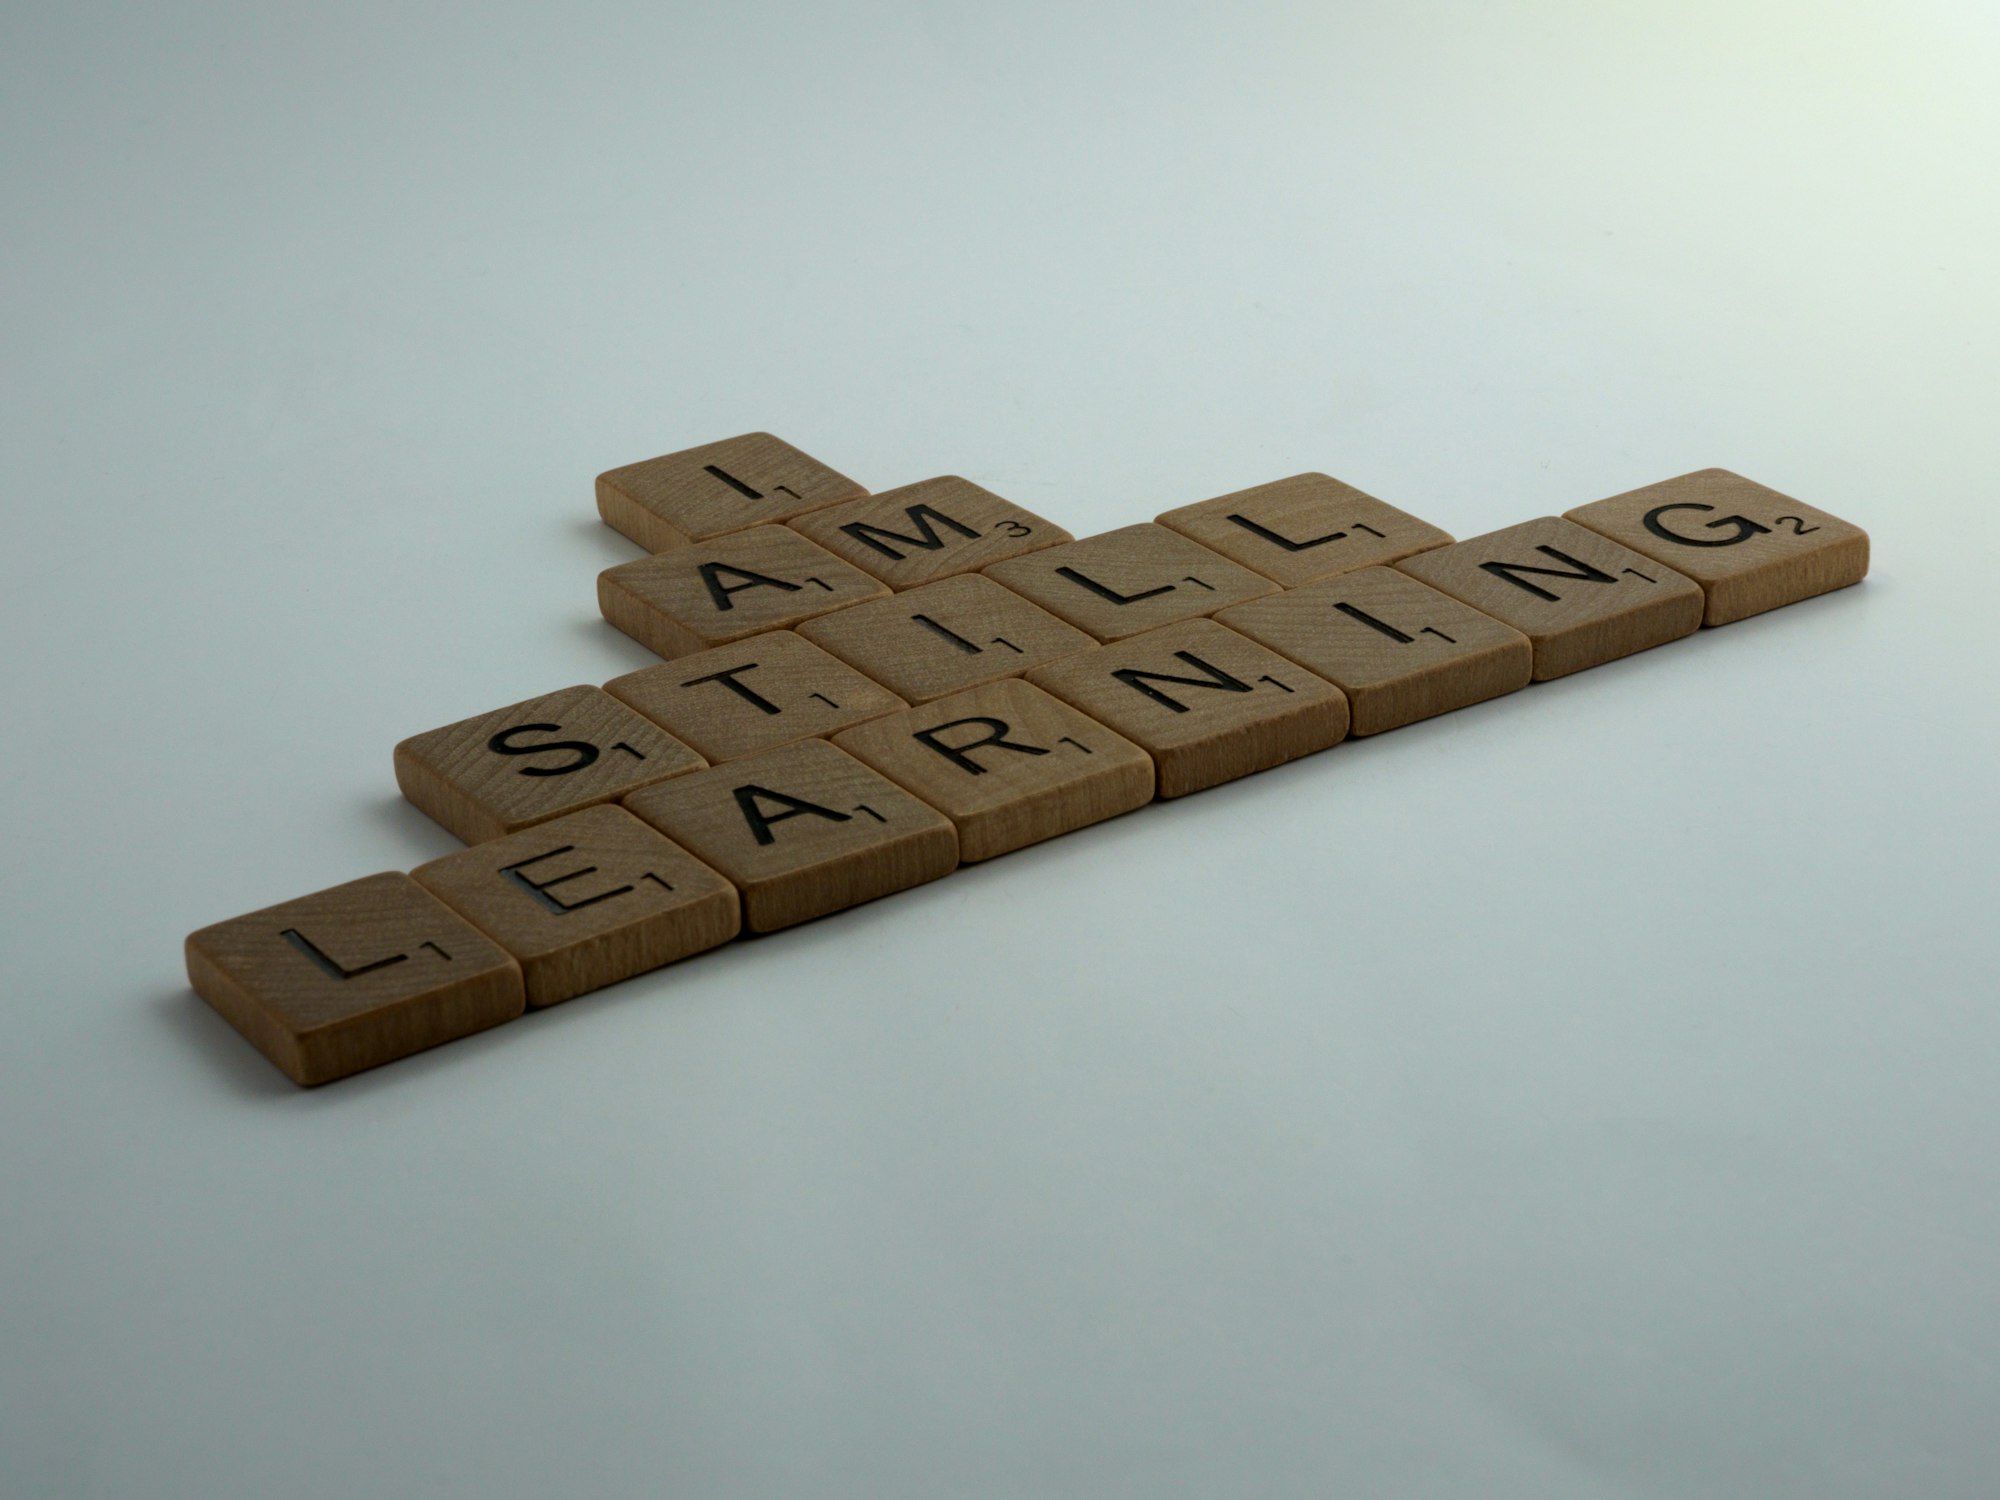 scrabble, scrabble pieces, lettering, letters, wood, scrabble tiles, words, quote, i am still learning, learning, learn, study, life study, always learning, world student, student of life, 
